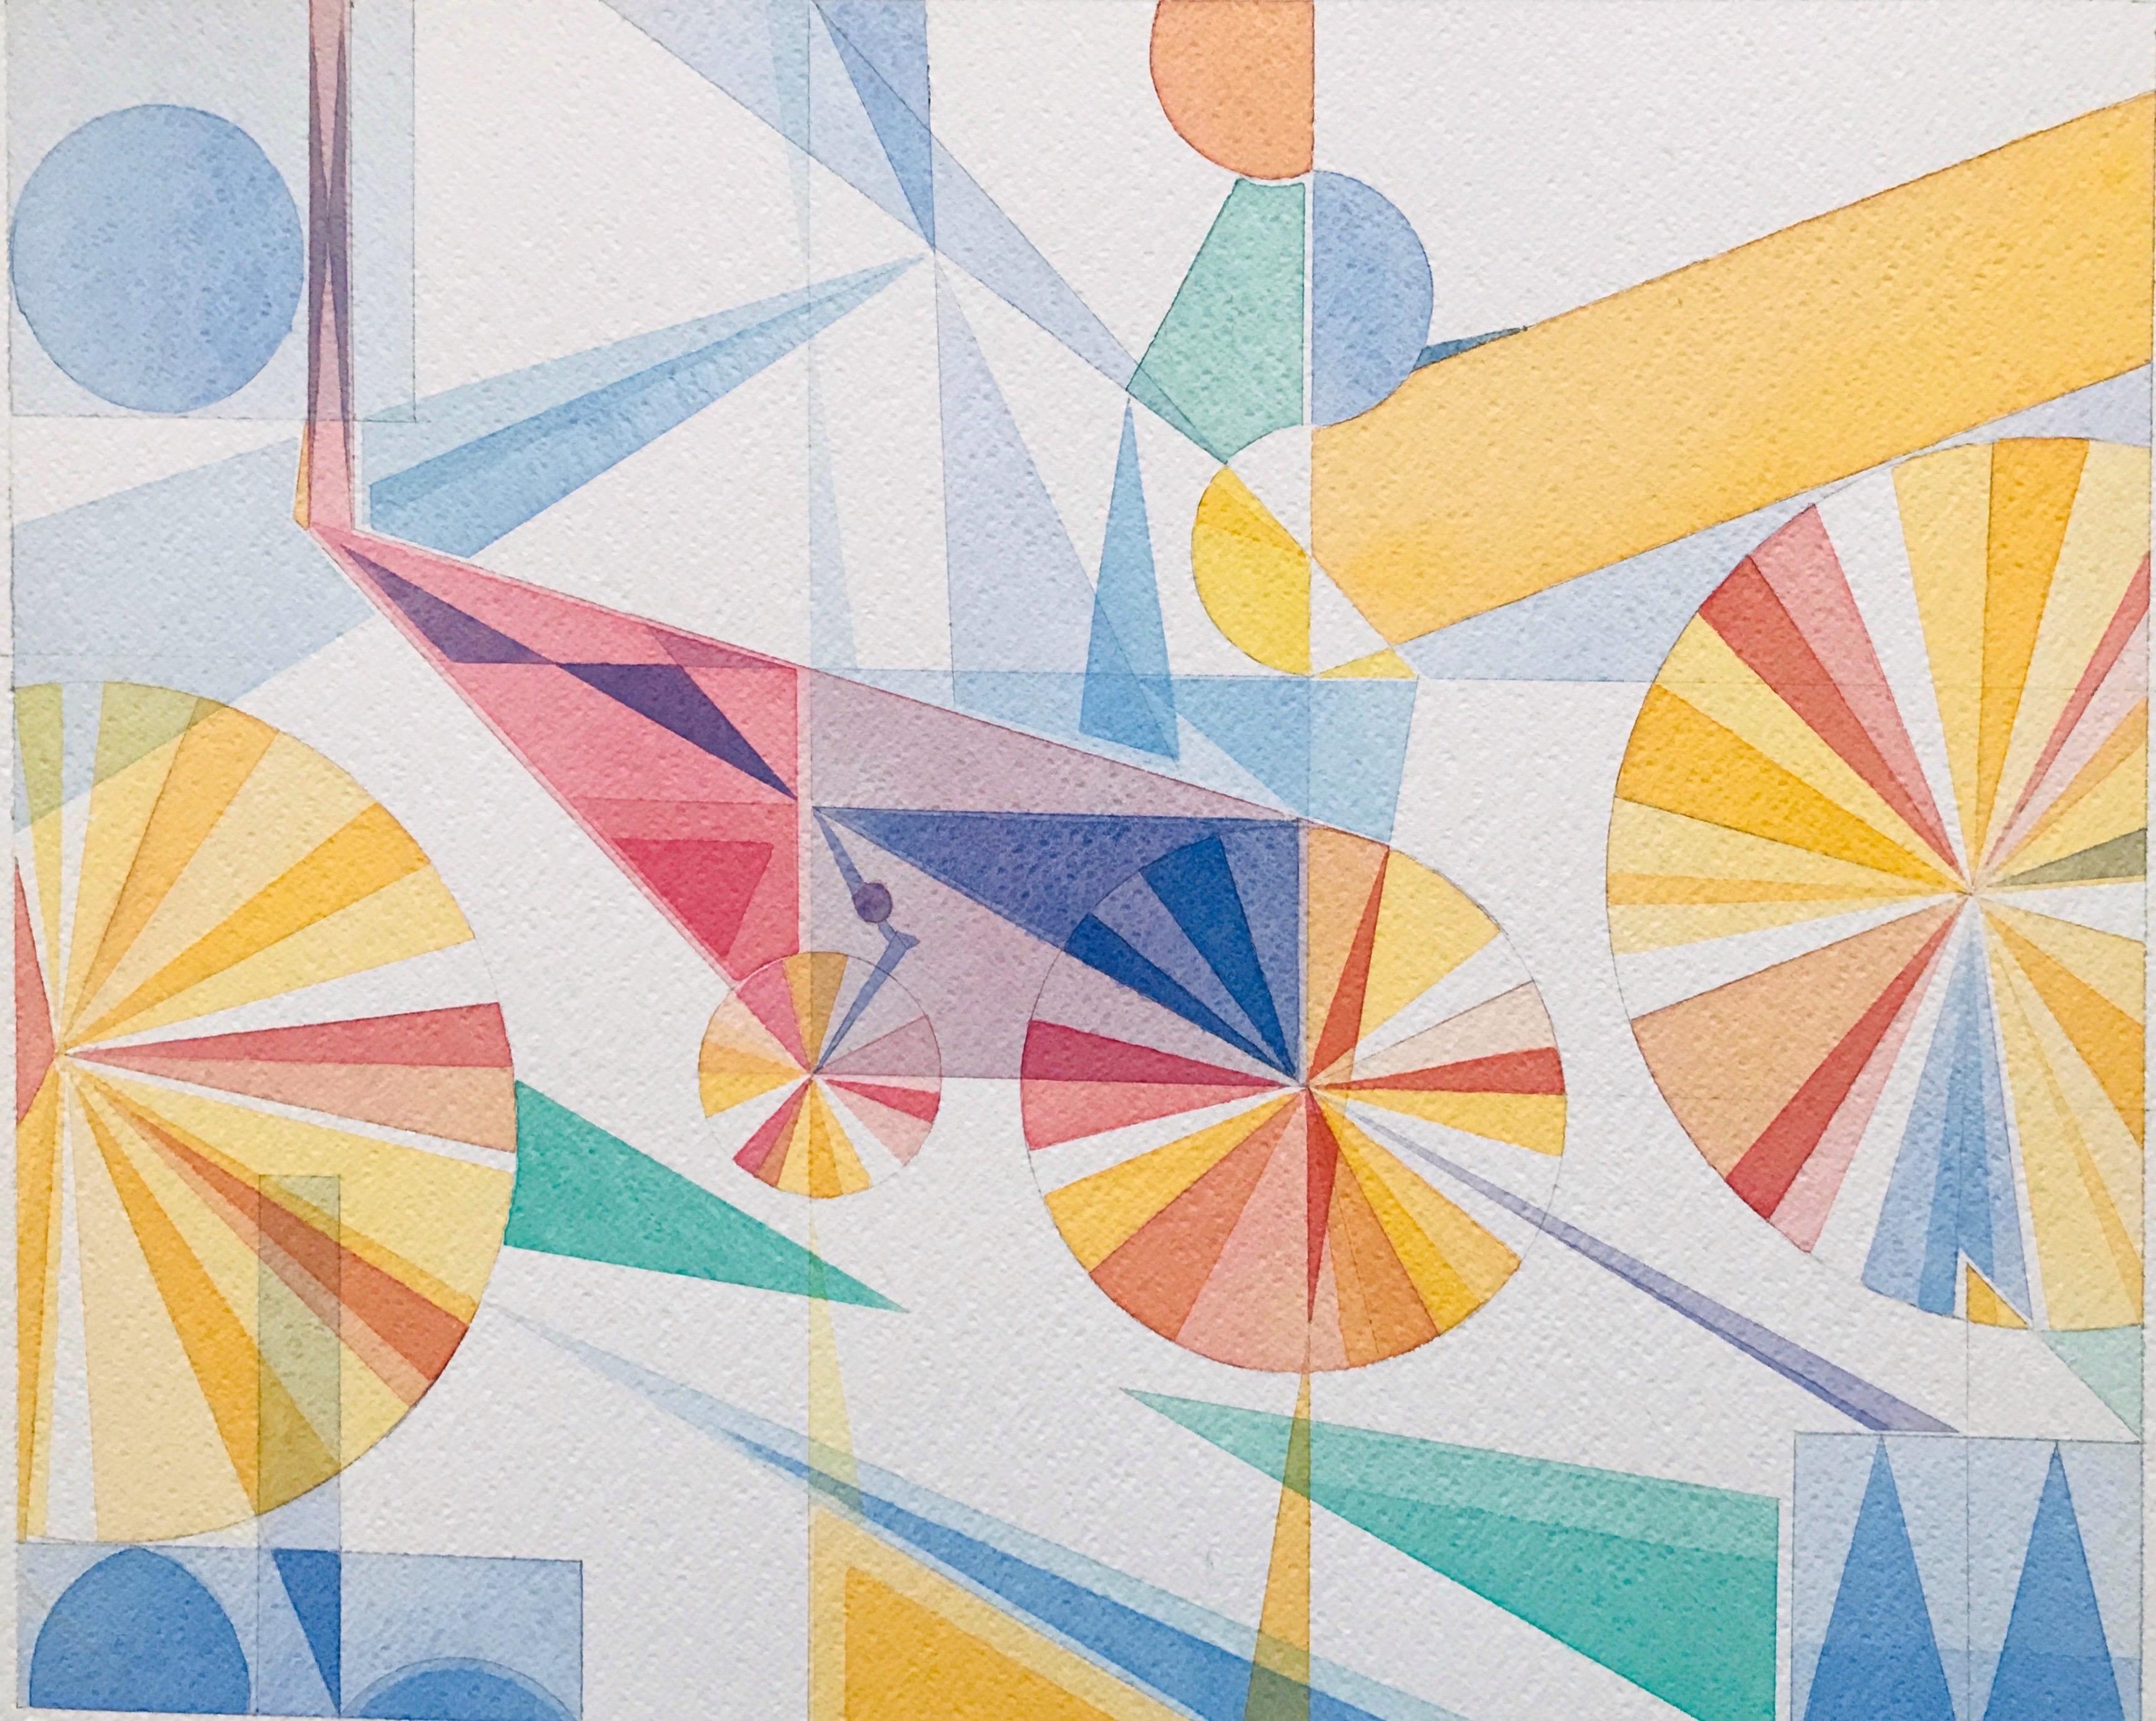 Abstract Geometric Landscape Drawings and Watercolors